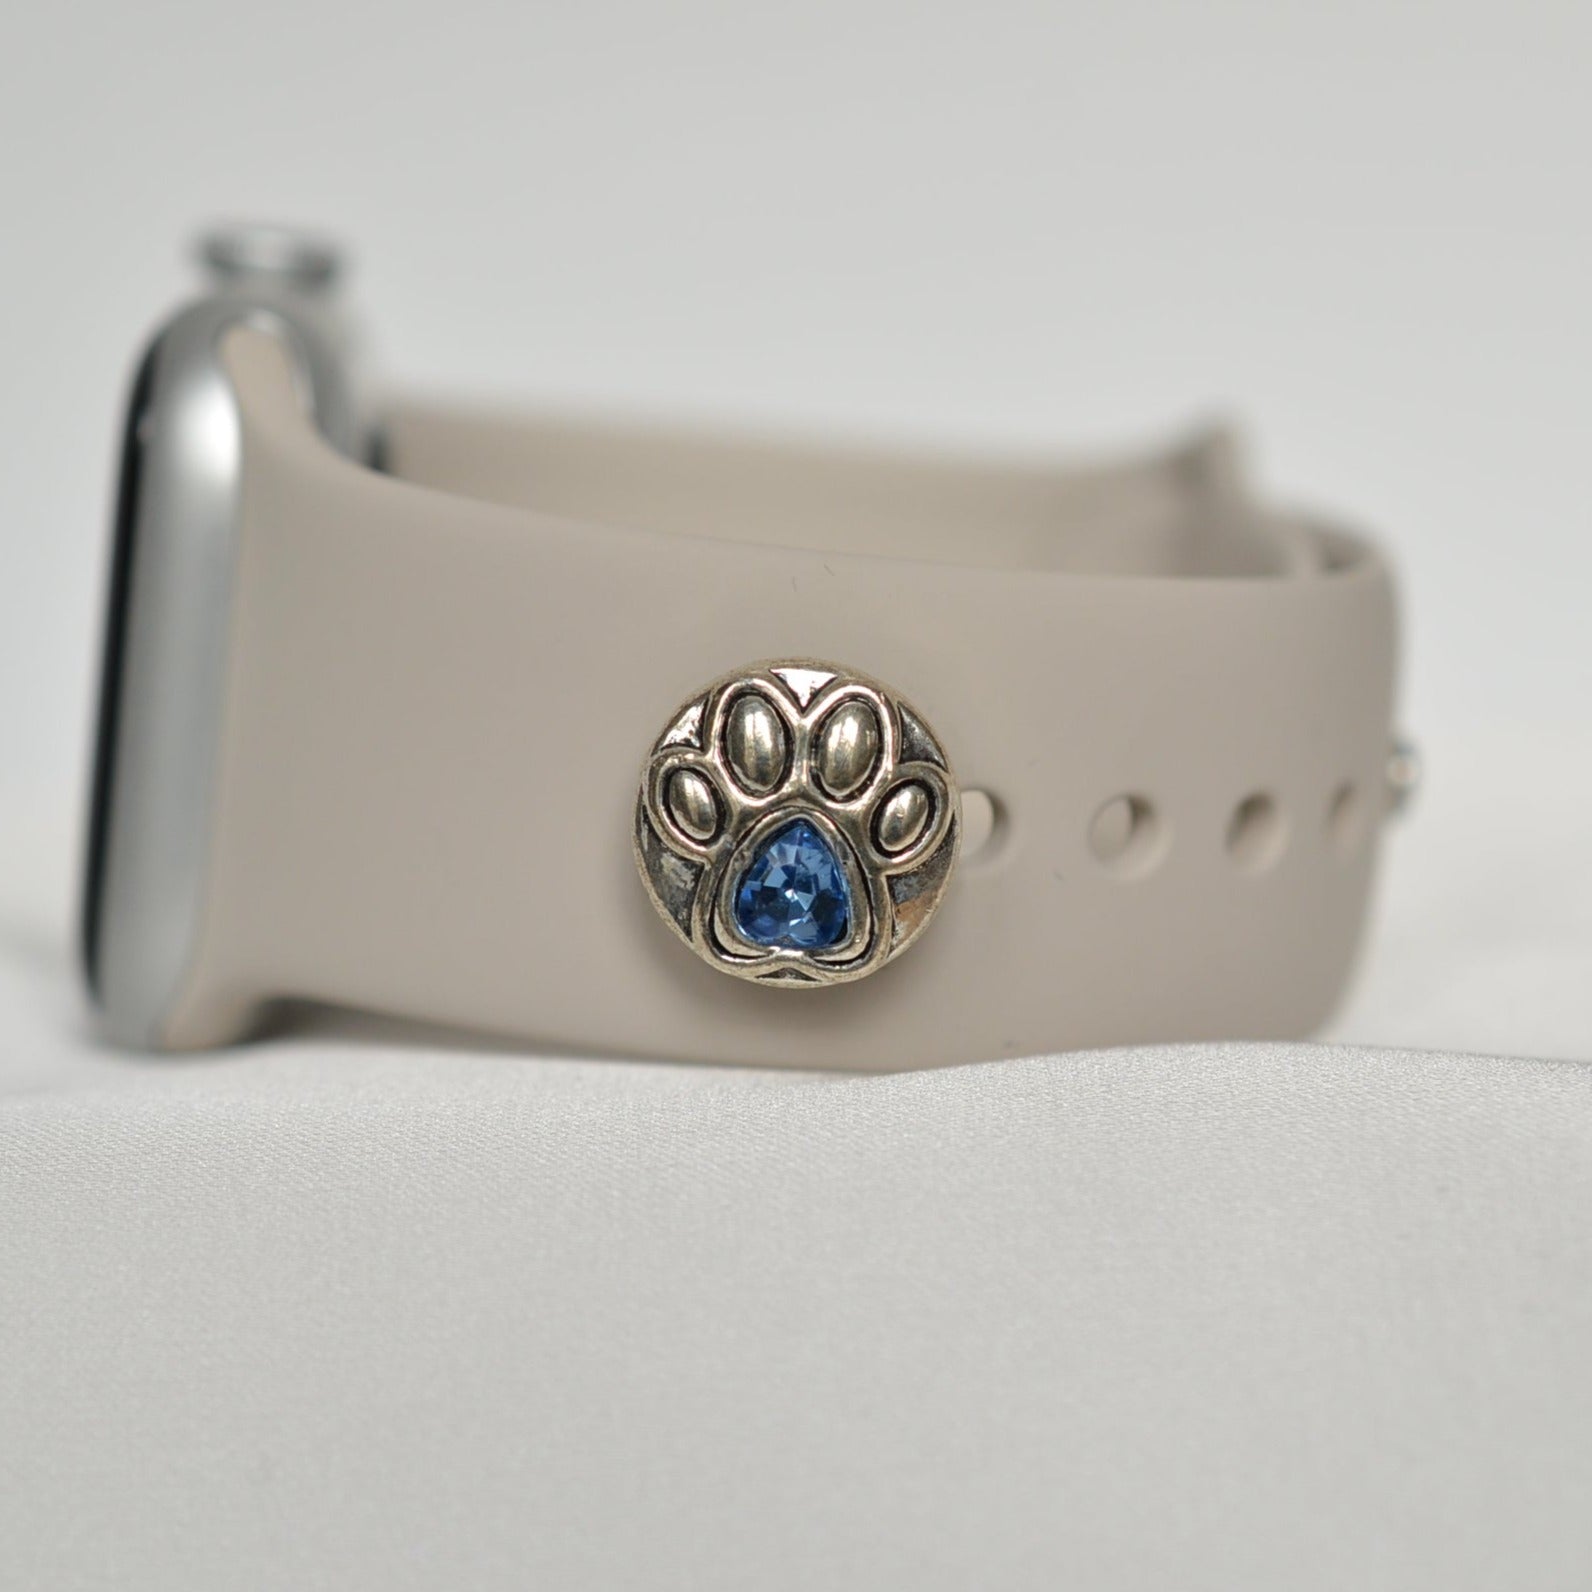 Dog & Cat Paw Charm (Blue Paw) for belts, bags and watch bands